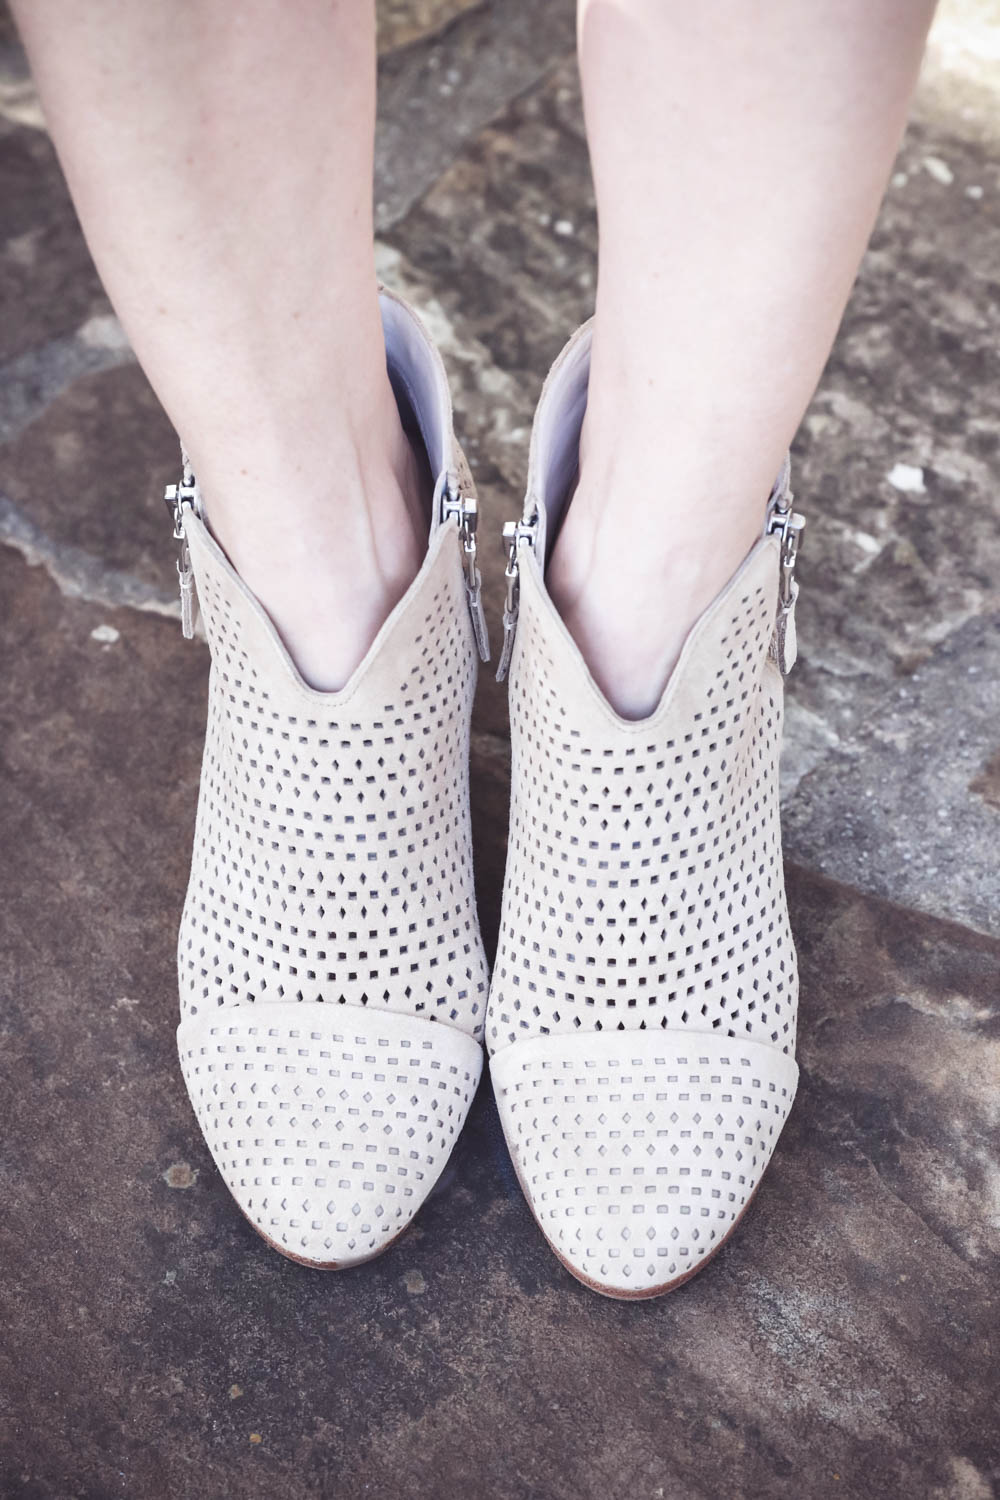 spring wardrobe basics, spring booties by Rag and bone from nordstrom in beige with perforations worn by Erin Busbee of busbeestyle from san antonio texas, fashion blogger and youtuber